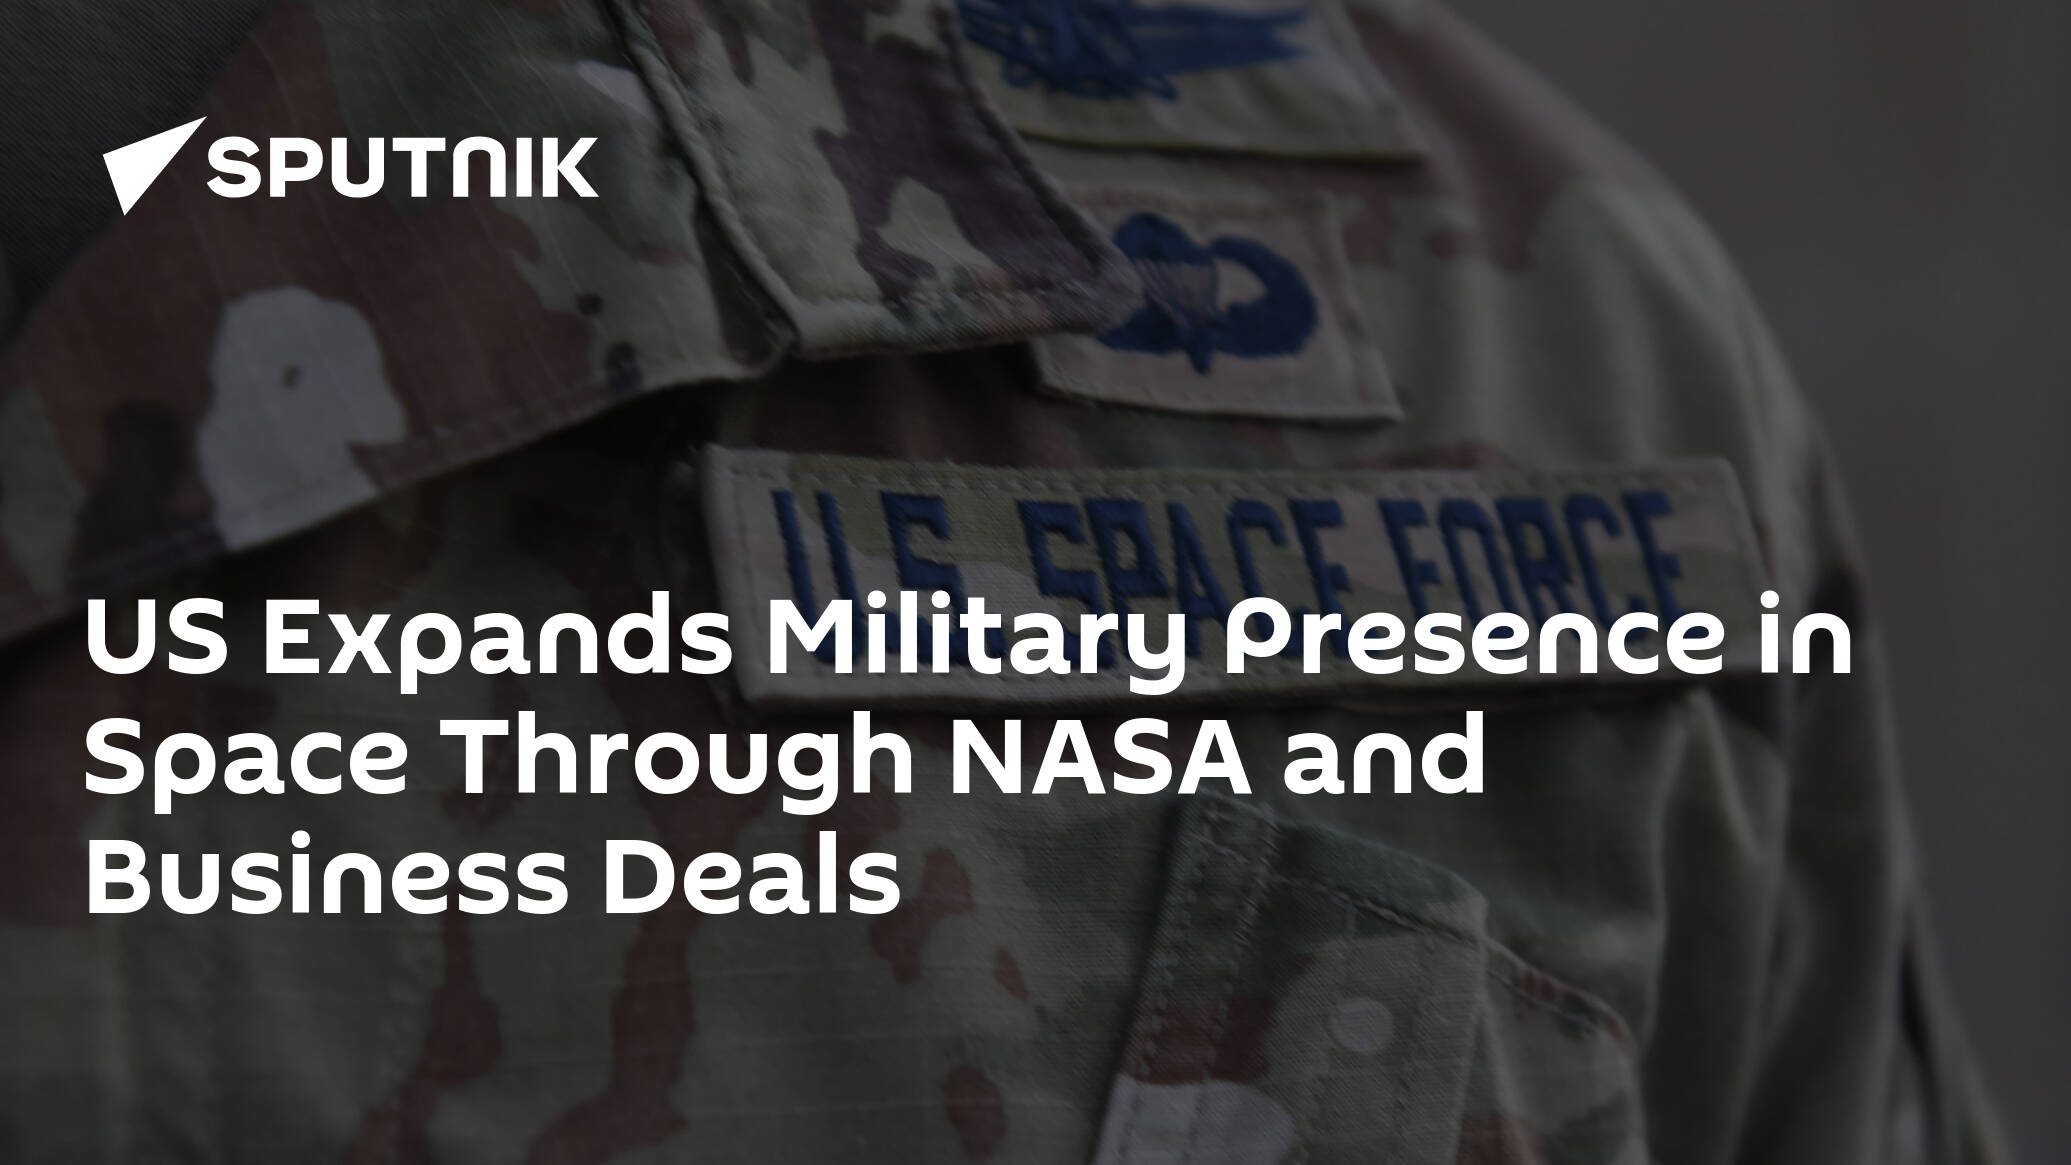 US Expands Military Presence in Space Through NASA and Business Deals